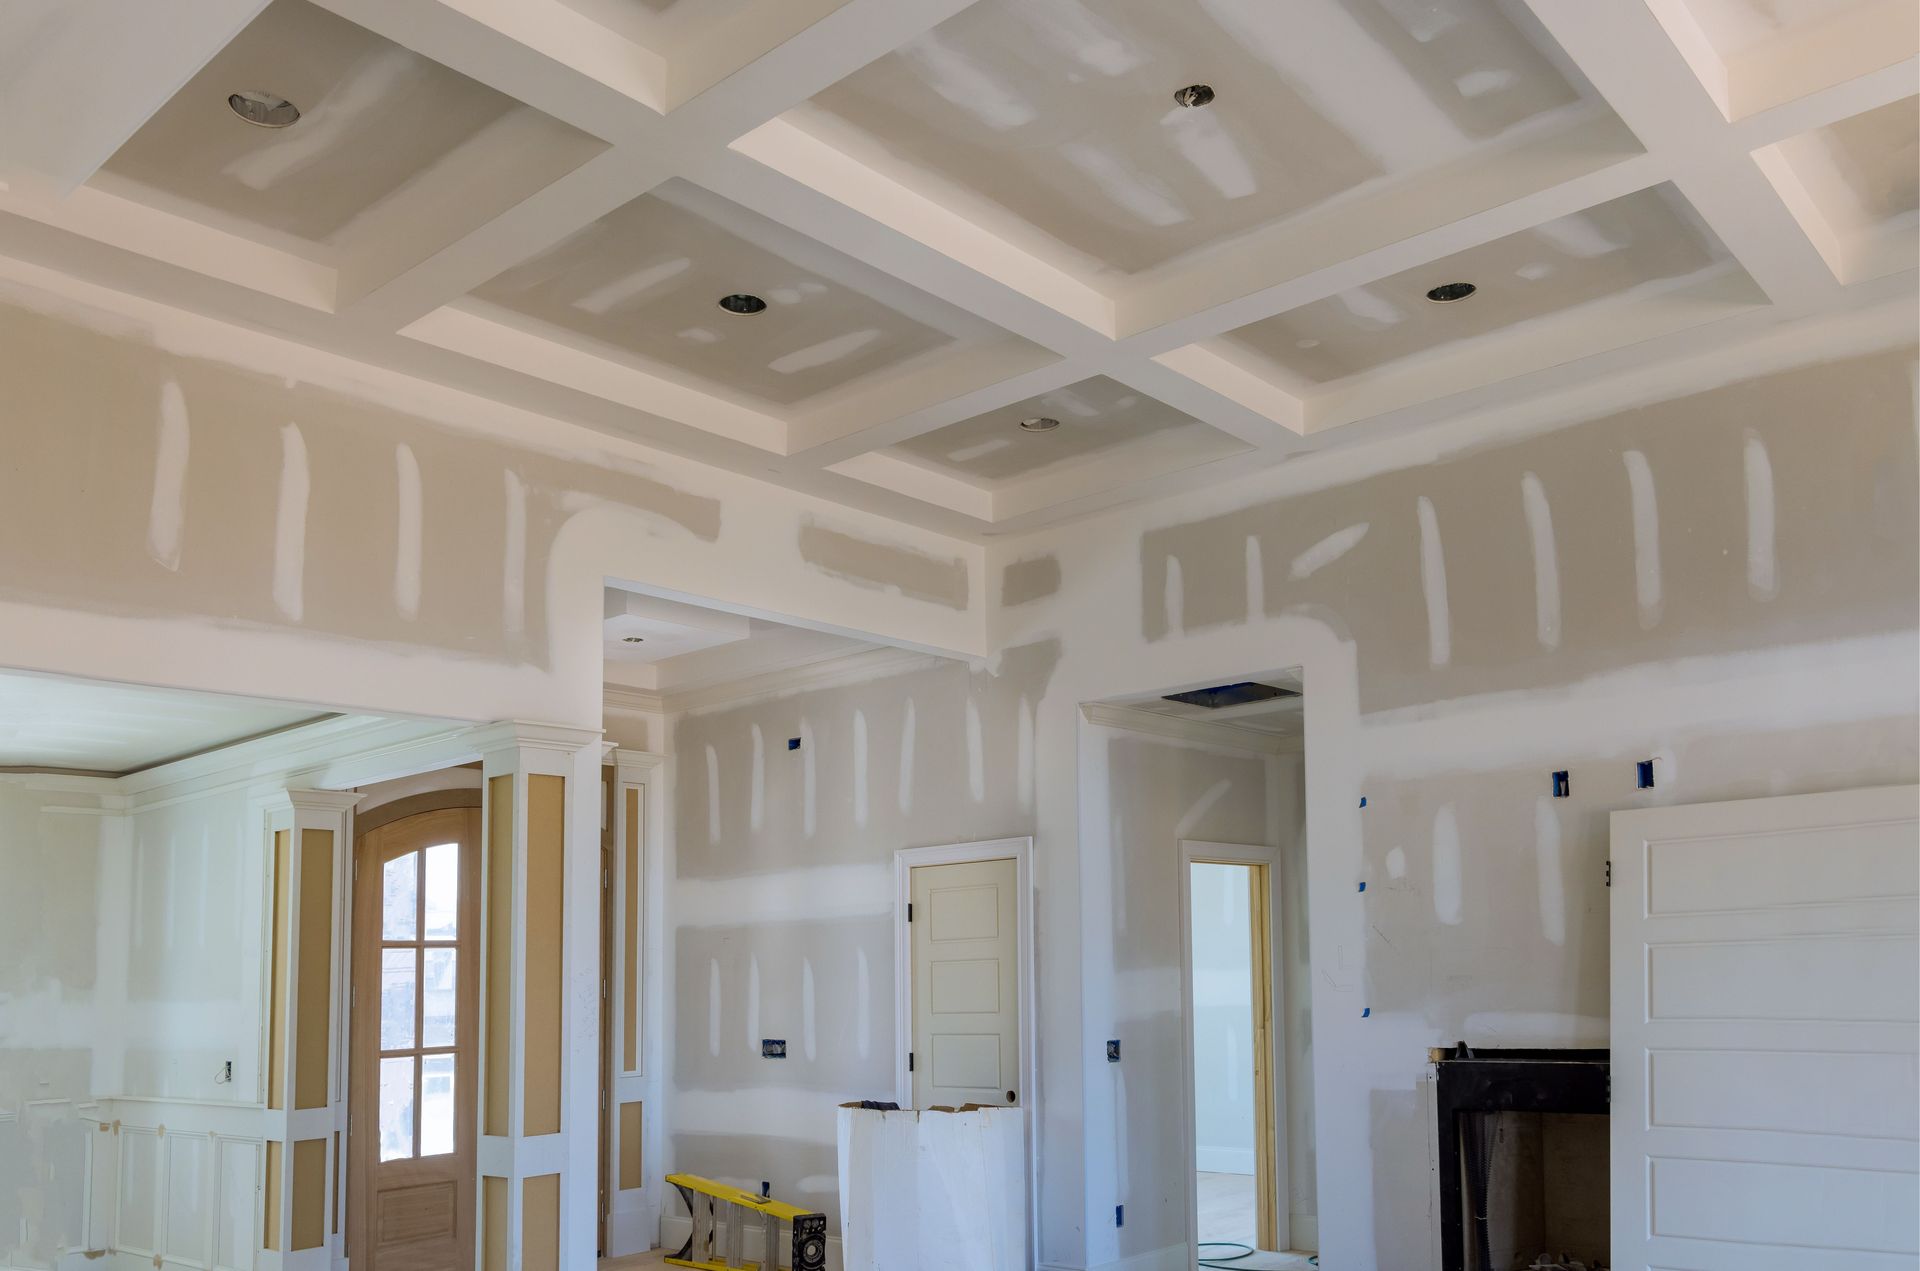 A room in a house under construction with drywall on the walls and ceiling.